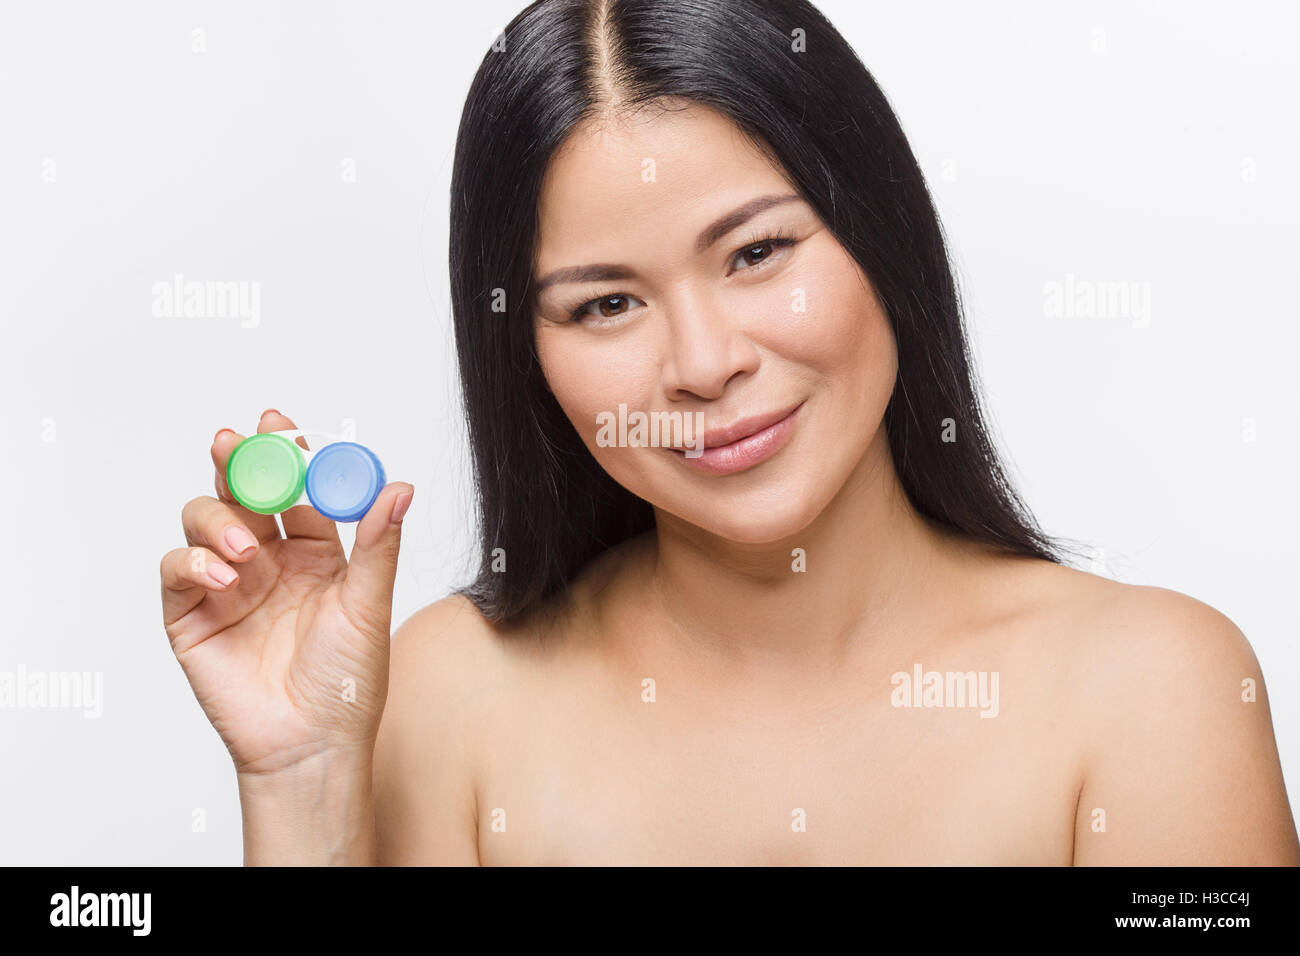 Woman with container for contact lenses Stock Photo